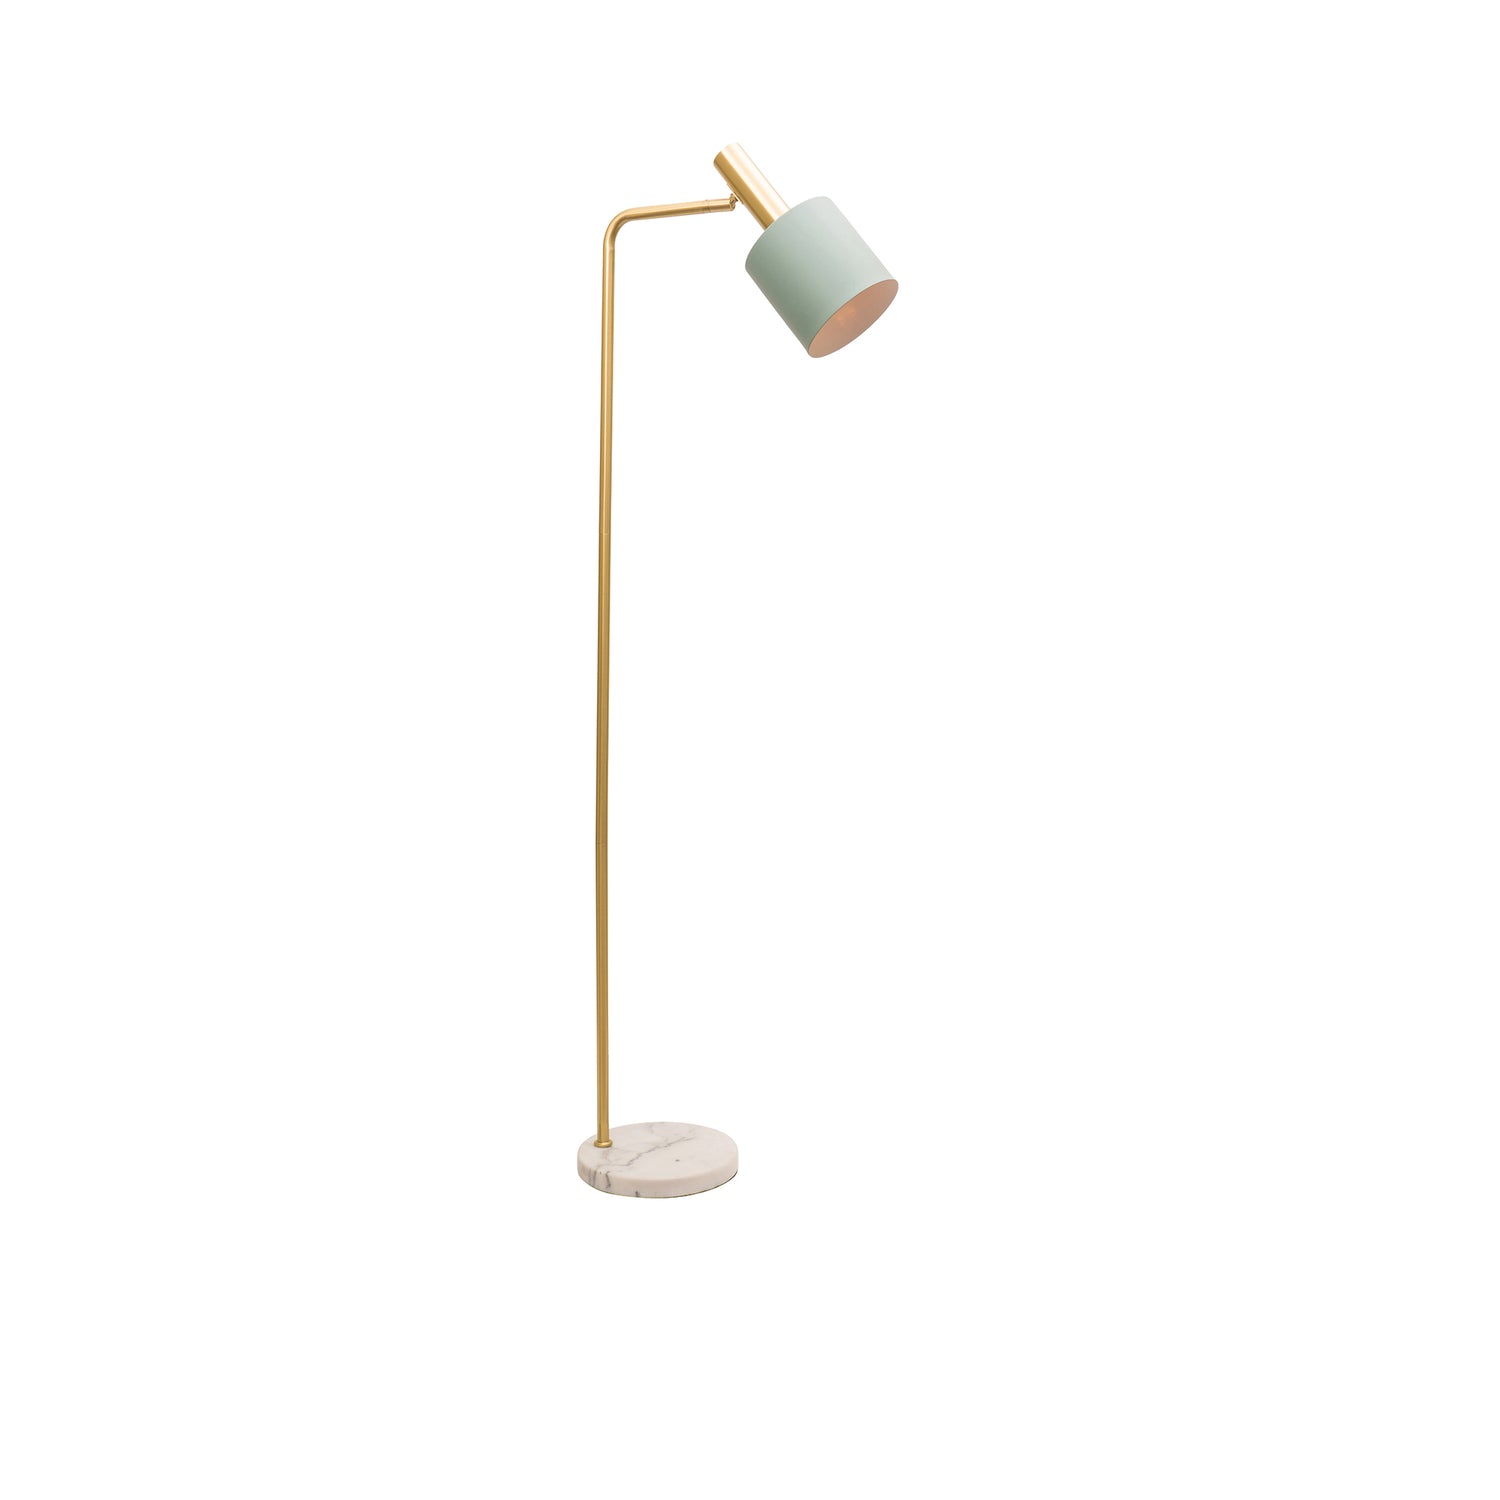 Addison Jade and Brushed Brass Modern Industrial Floor Lamp